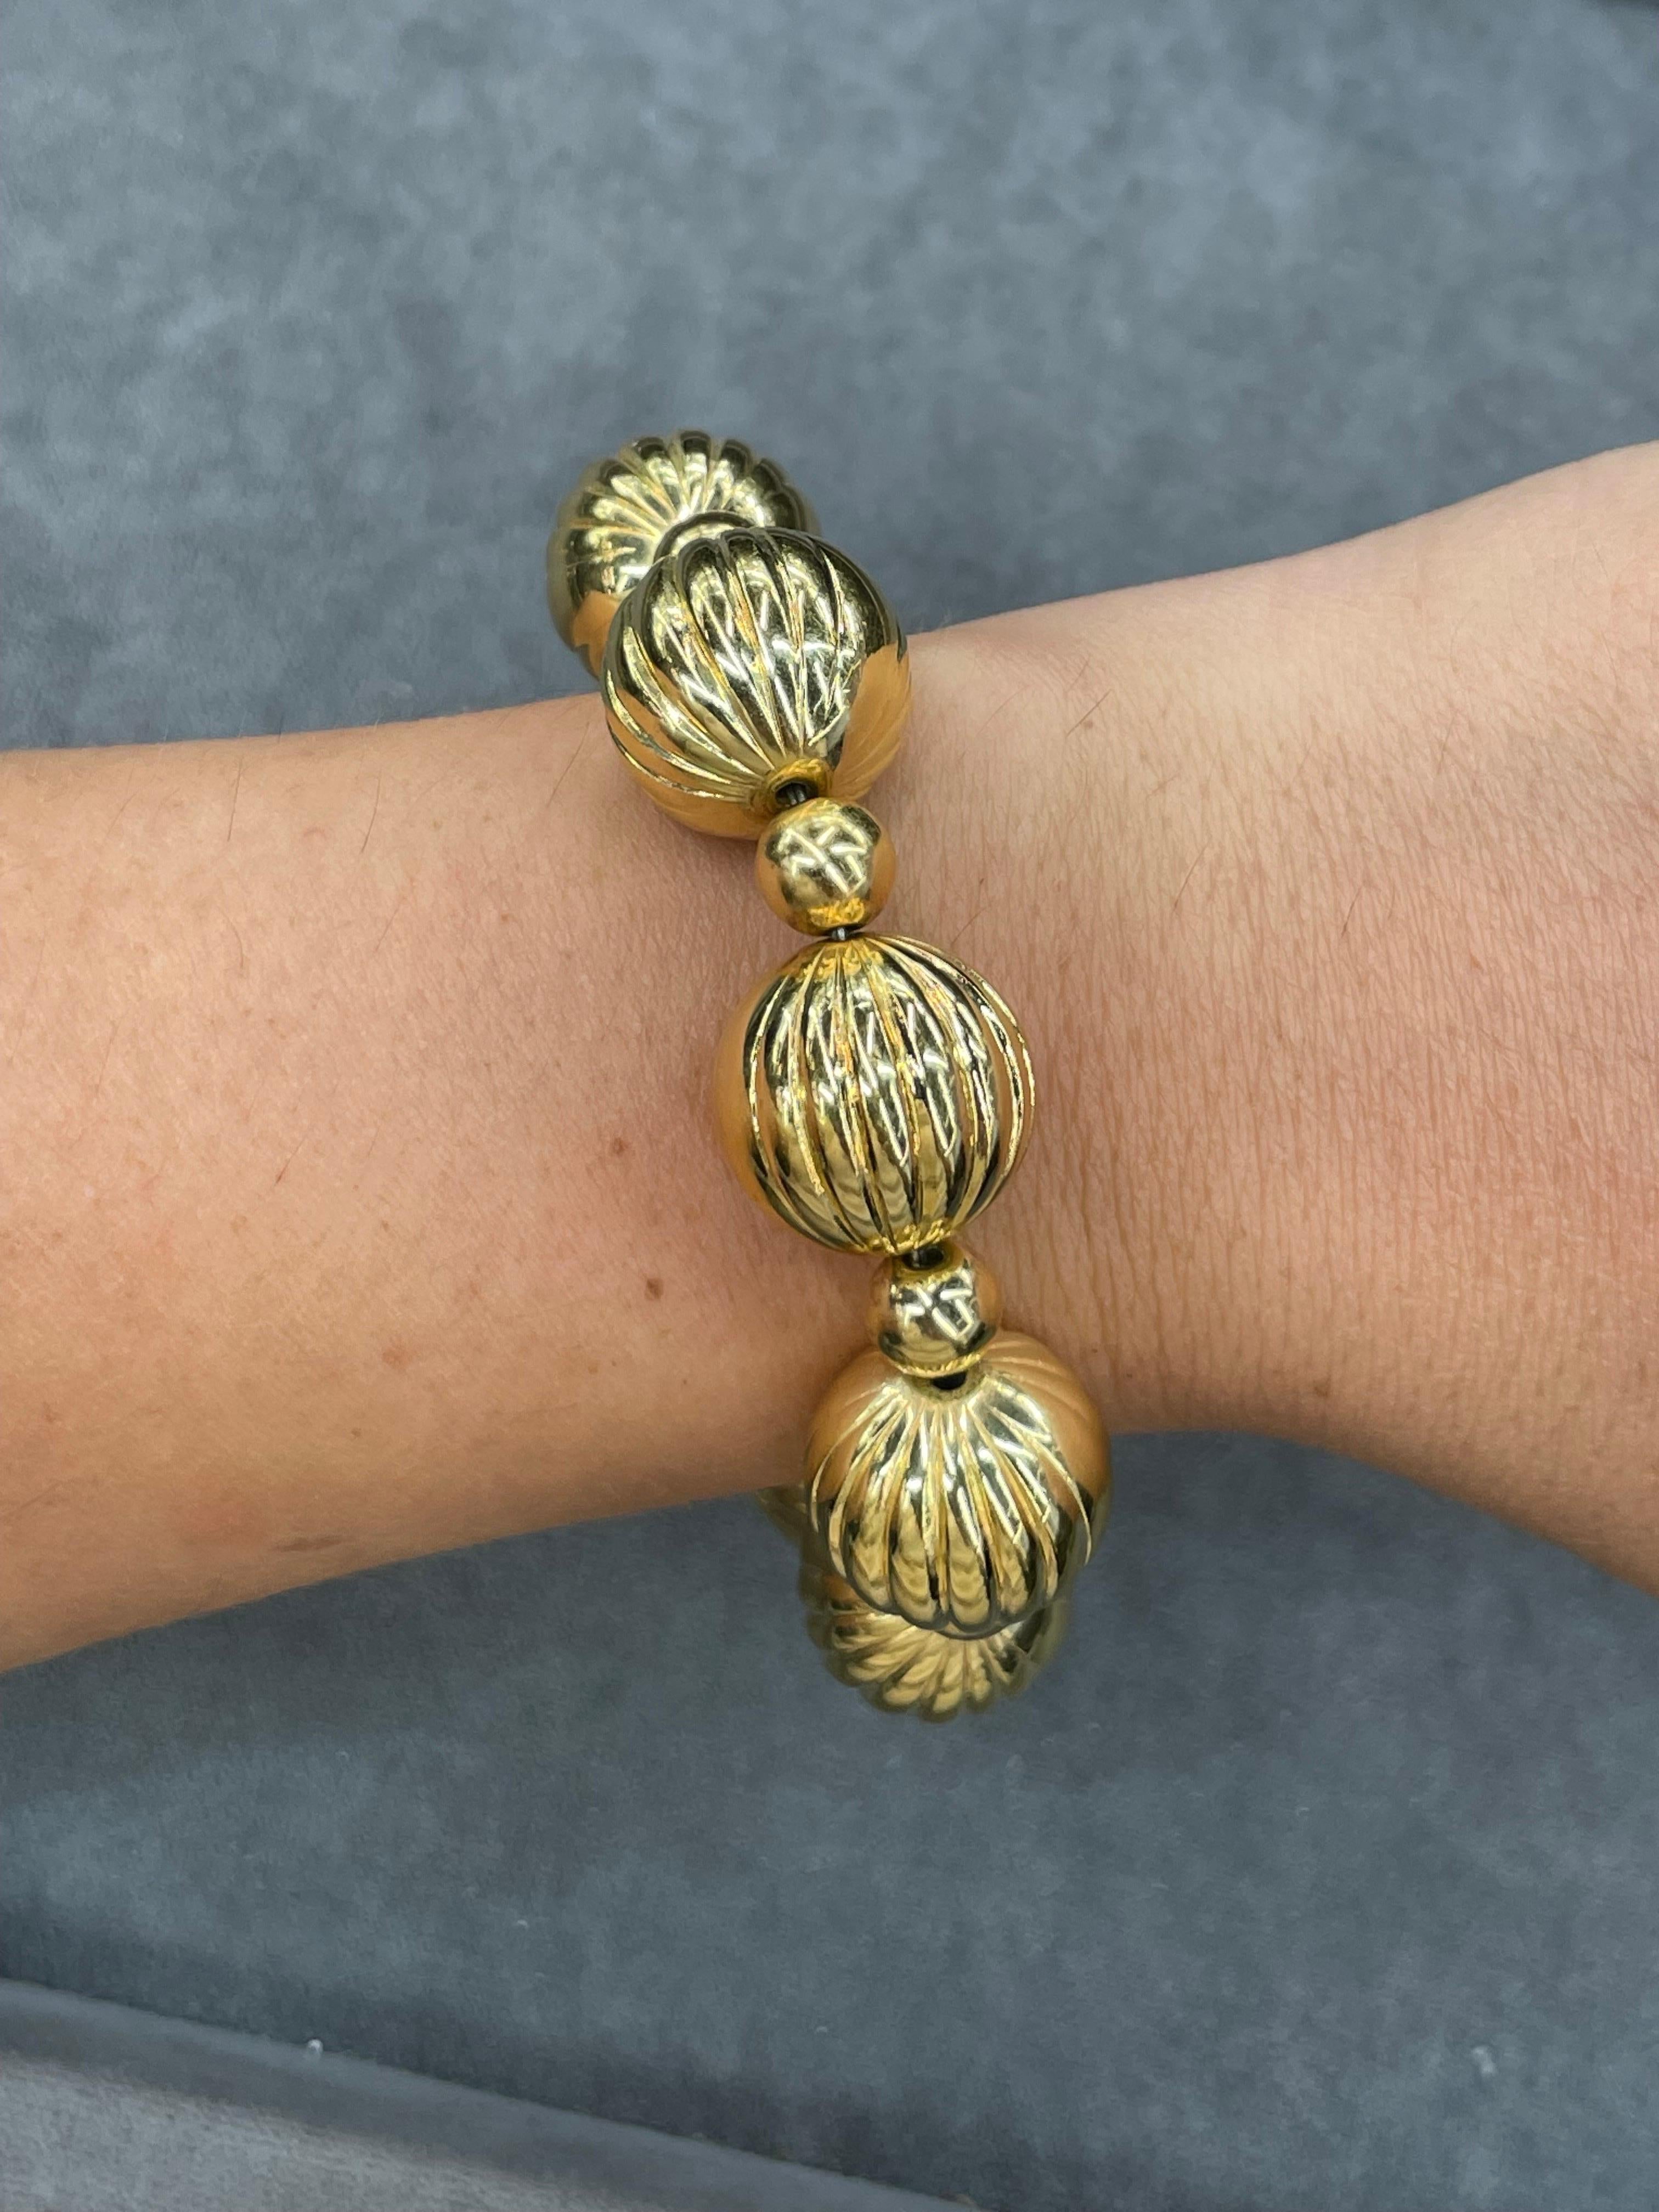 Milor Designer Italian Ball Bracelet with Magnet 14 Karat Yellow Gold 31.2 Grams In Excellent Condition For Sale In New York, NY